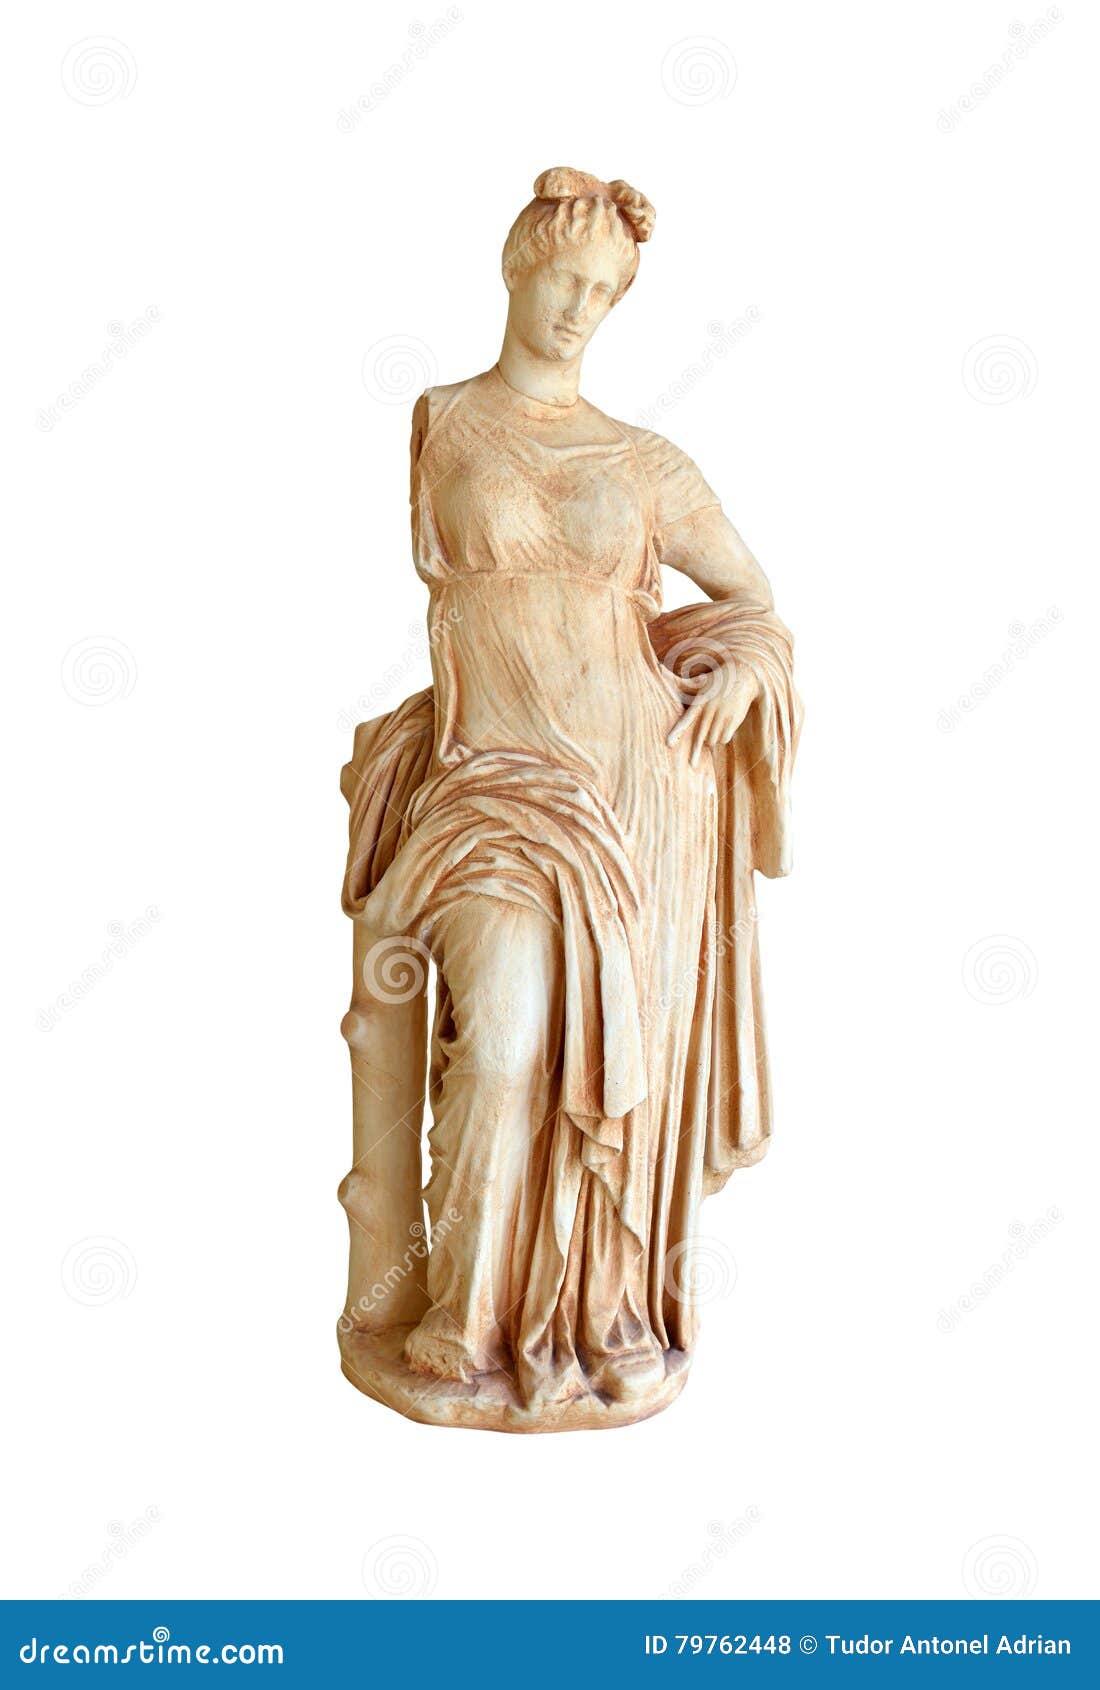 greek ancient sculpture. Greek Statue of Aphrodite the goddess of love isolated over white